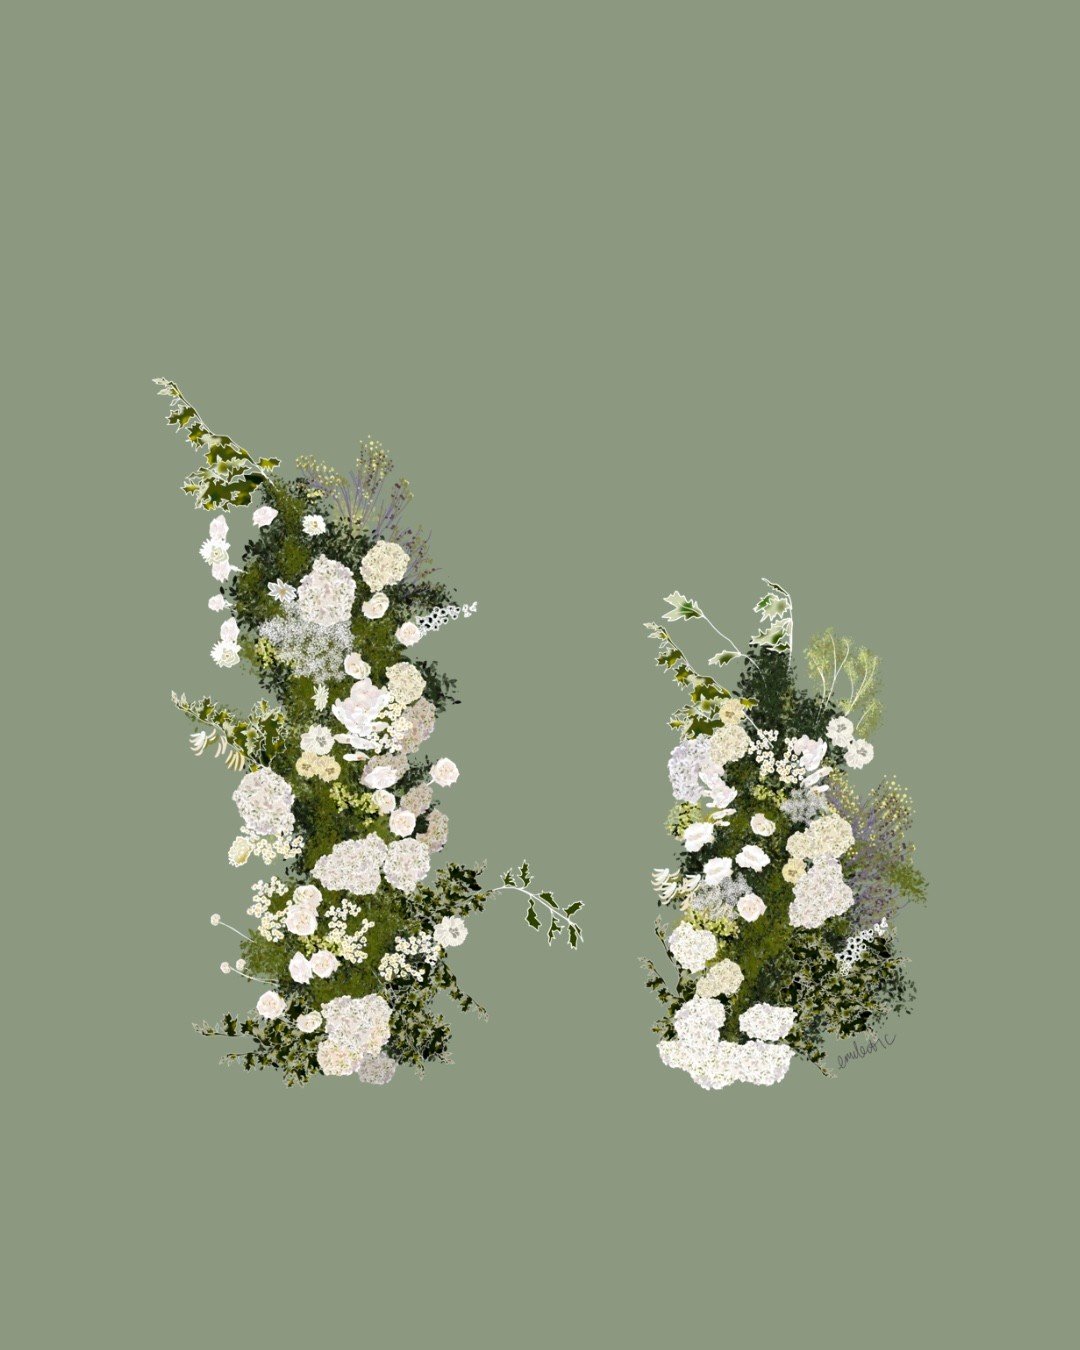 🧚EMCLECTIC x BOTANICAL QUARTER🕊️

Remember this? We've joined forces with the fantastic folks over at @botanical.quarter to eternalize your wedding blooms. Your Botanical Quarter flowers will now be immortalised in a distinctive and modern style, u